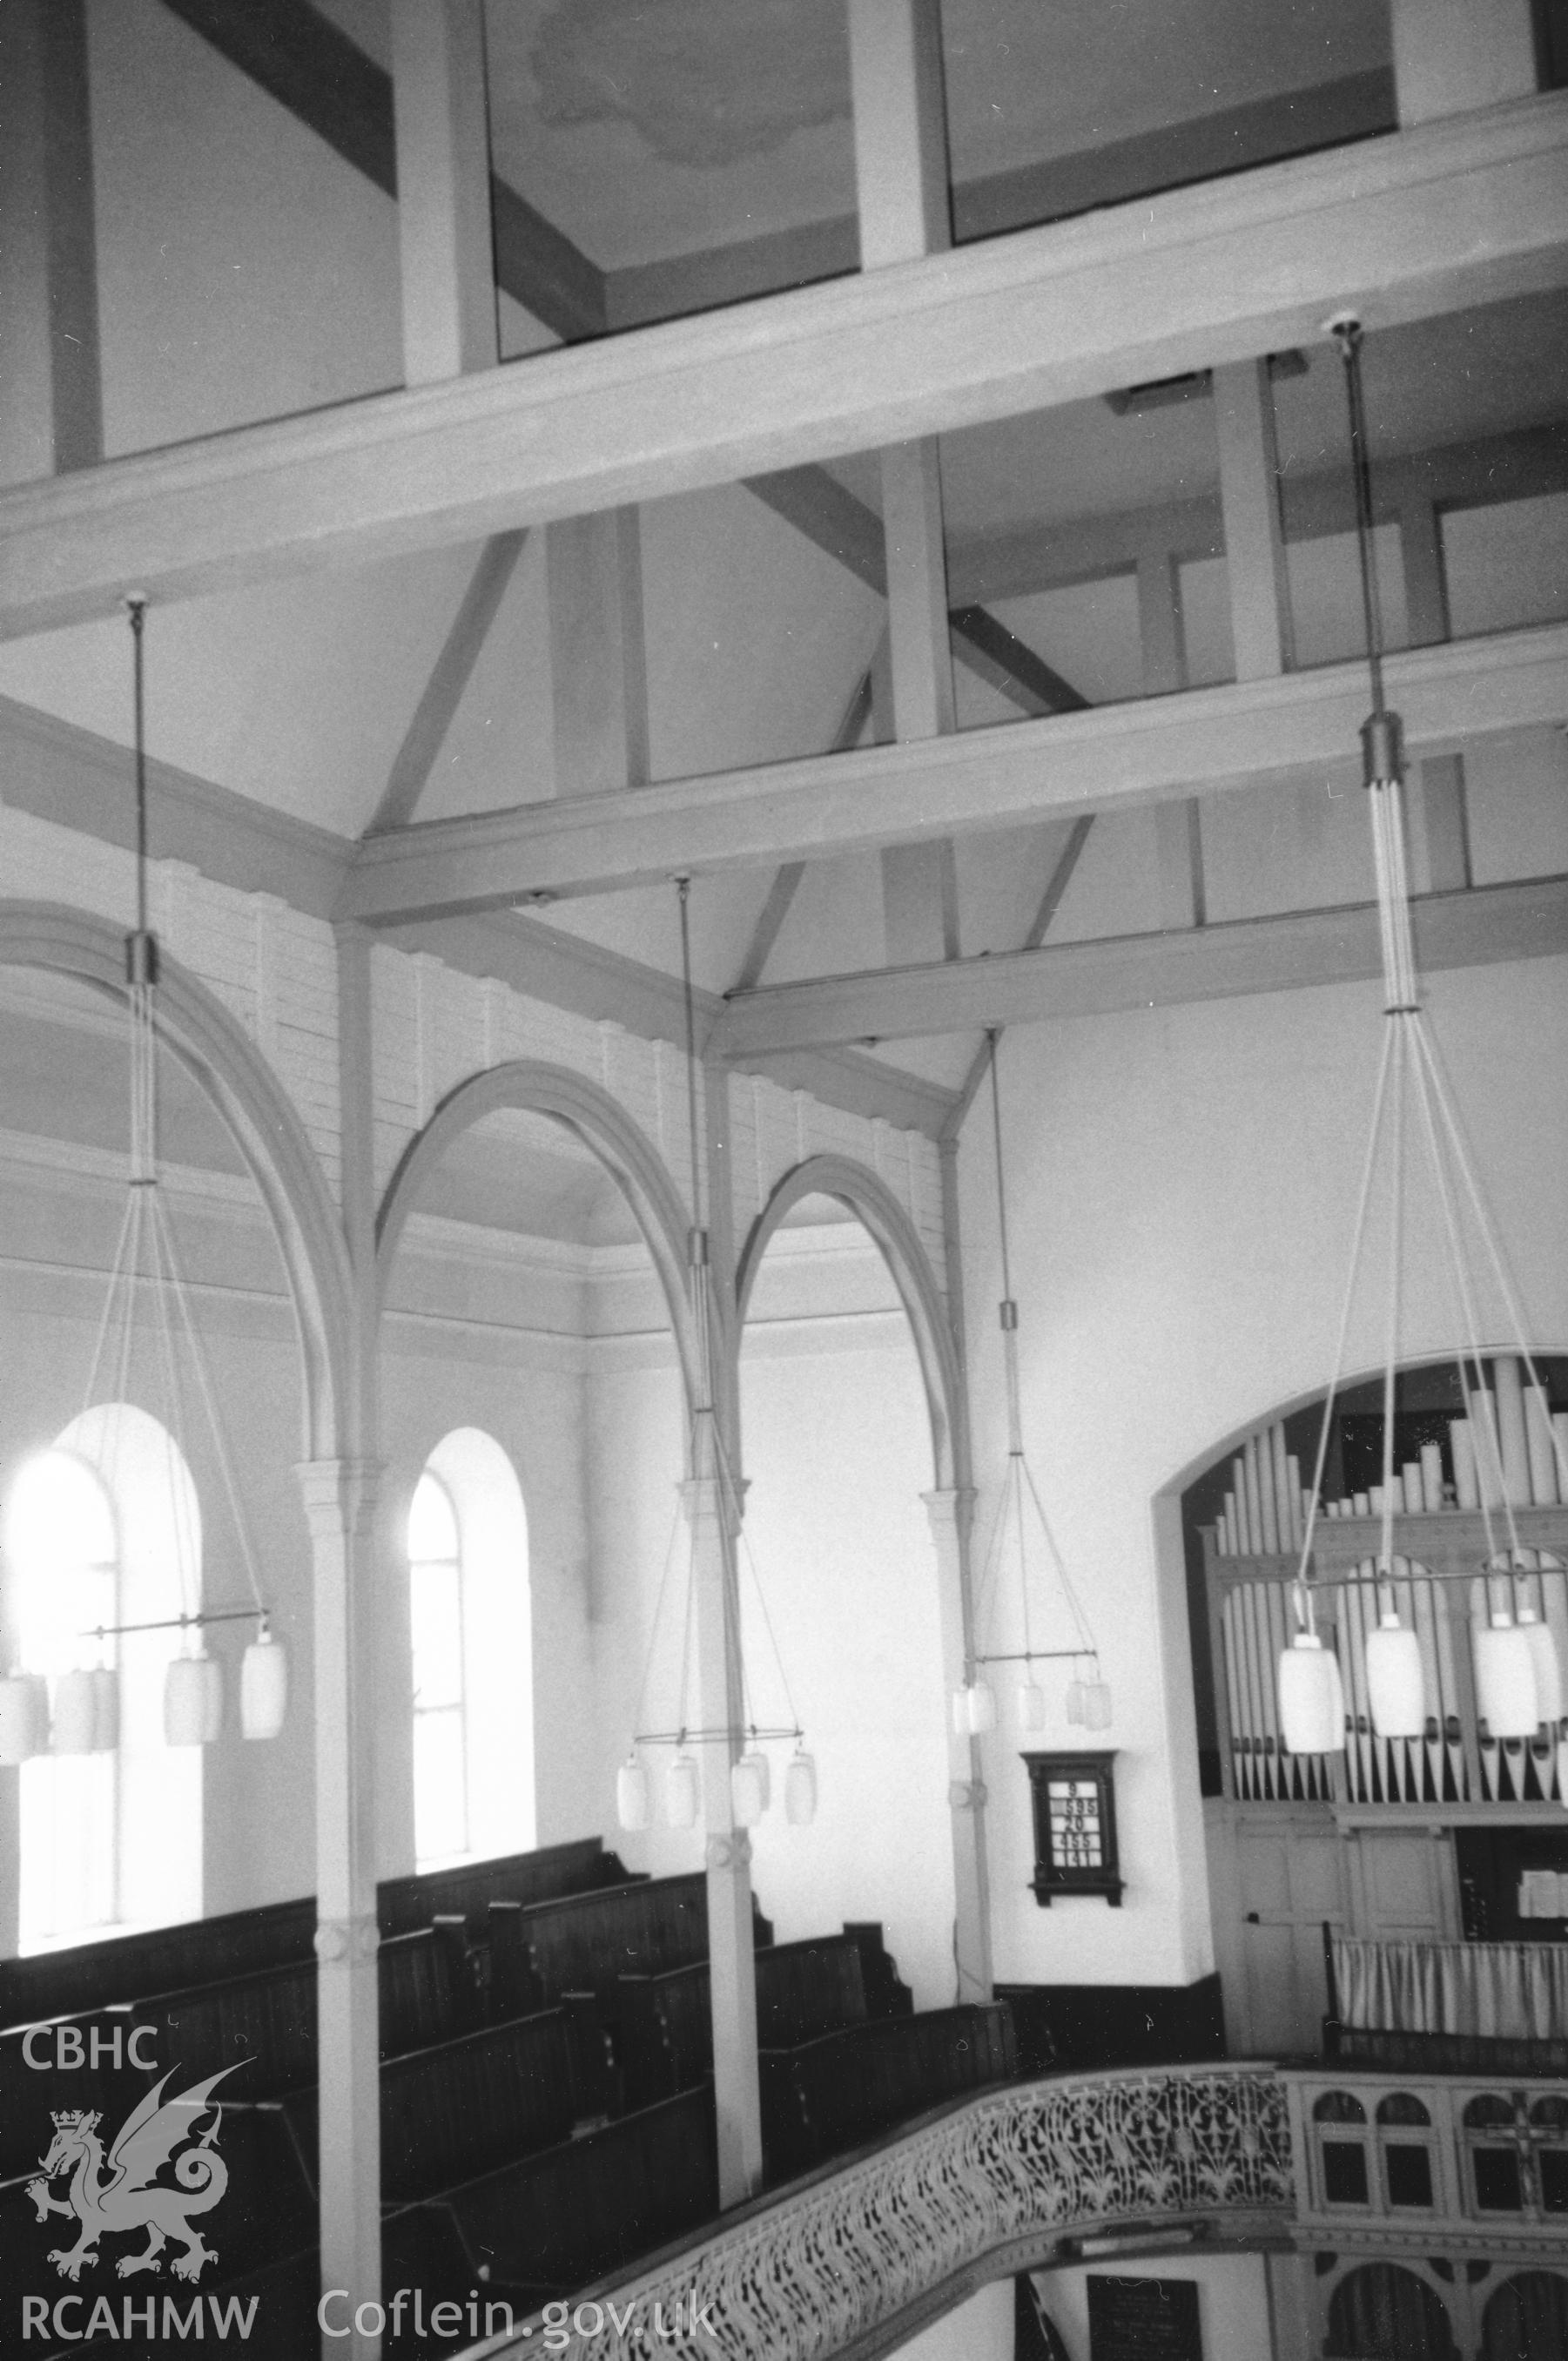 Digital copy of a black and white photograph showing an interior view of Bethany English Baptist Chapel, Pembroke Dock, taken by Robert Scourfield, c.1996.